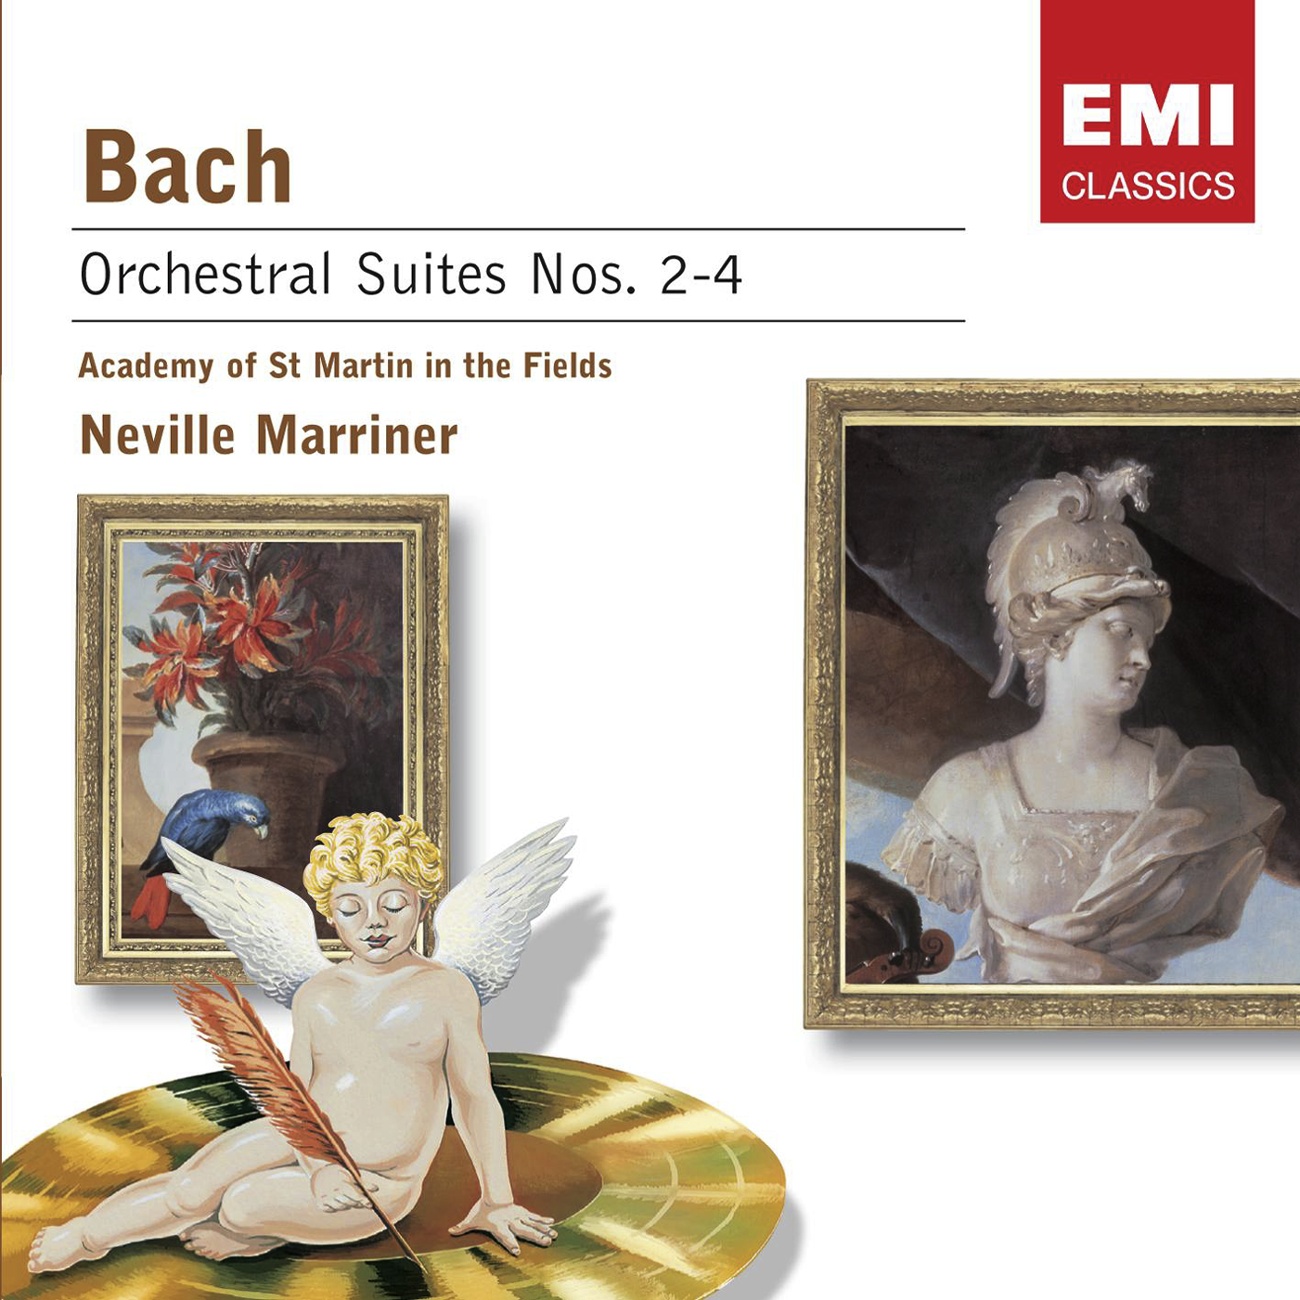 4 Orchestral Suites, BWV 1066-9, Suite No.4 in D Major, BWV 1069 (3 oboes, 3 trumpets, strings and timpani): Gavotte